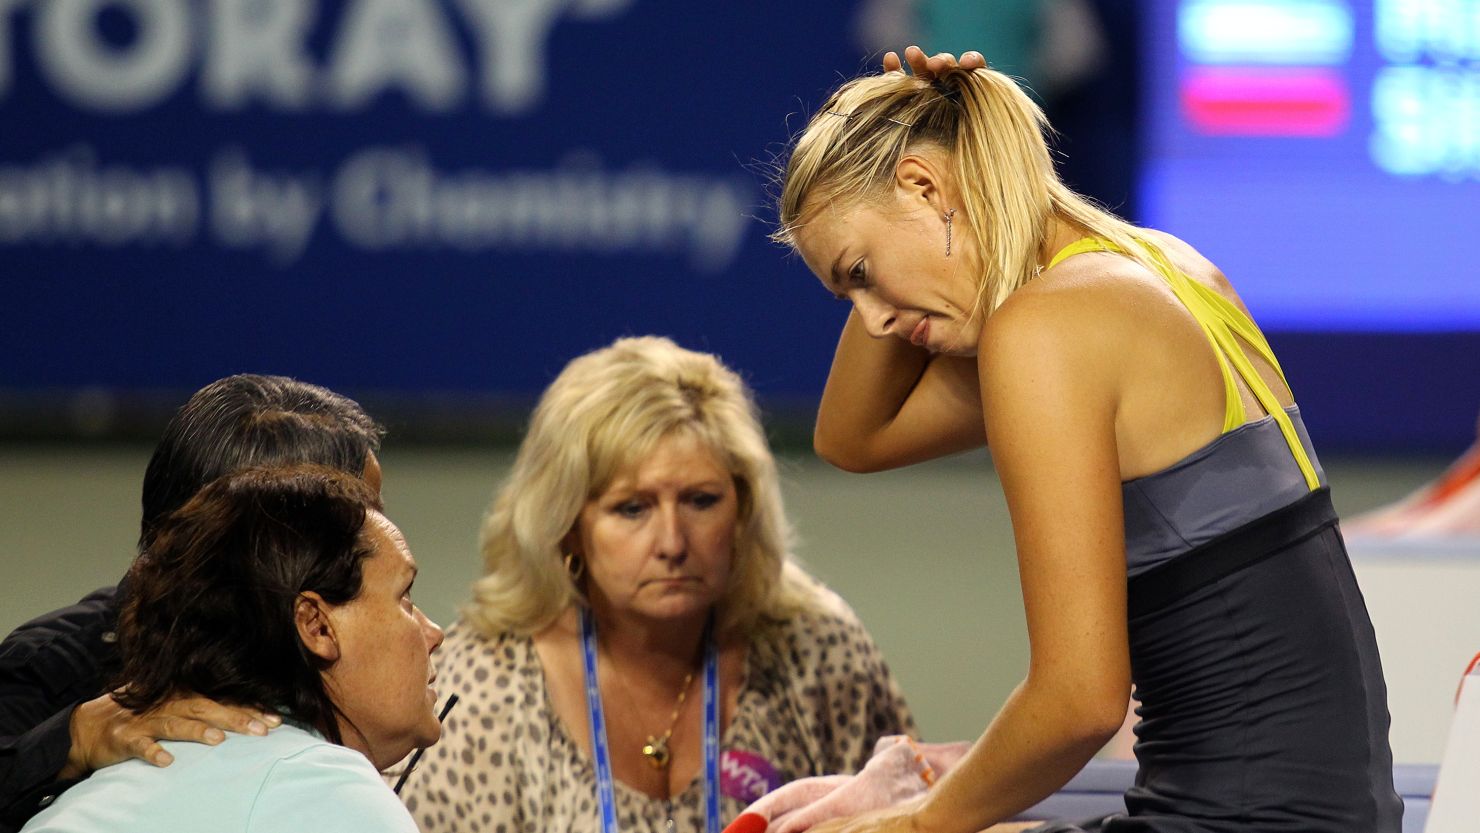 World number two Maria Sharapova pulls out of the Pan Pacific Open after injuring her ankle